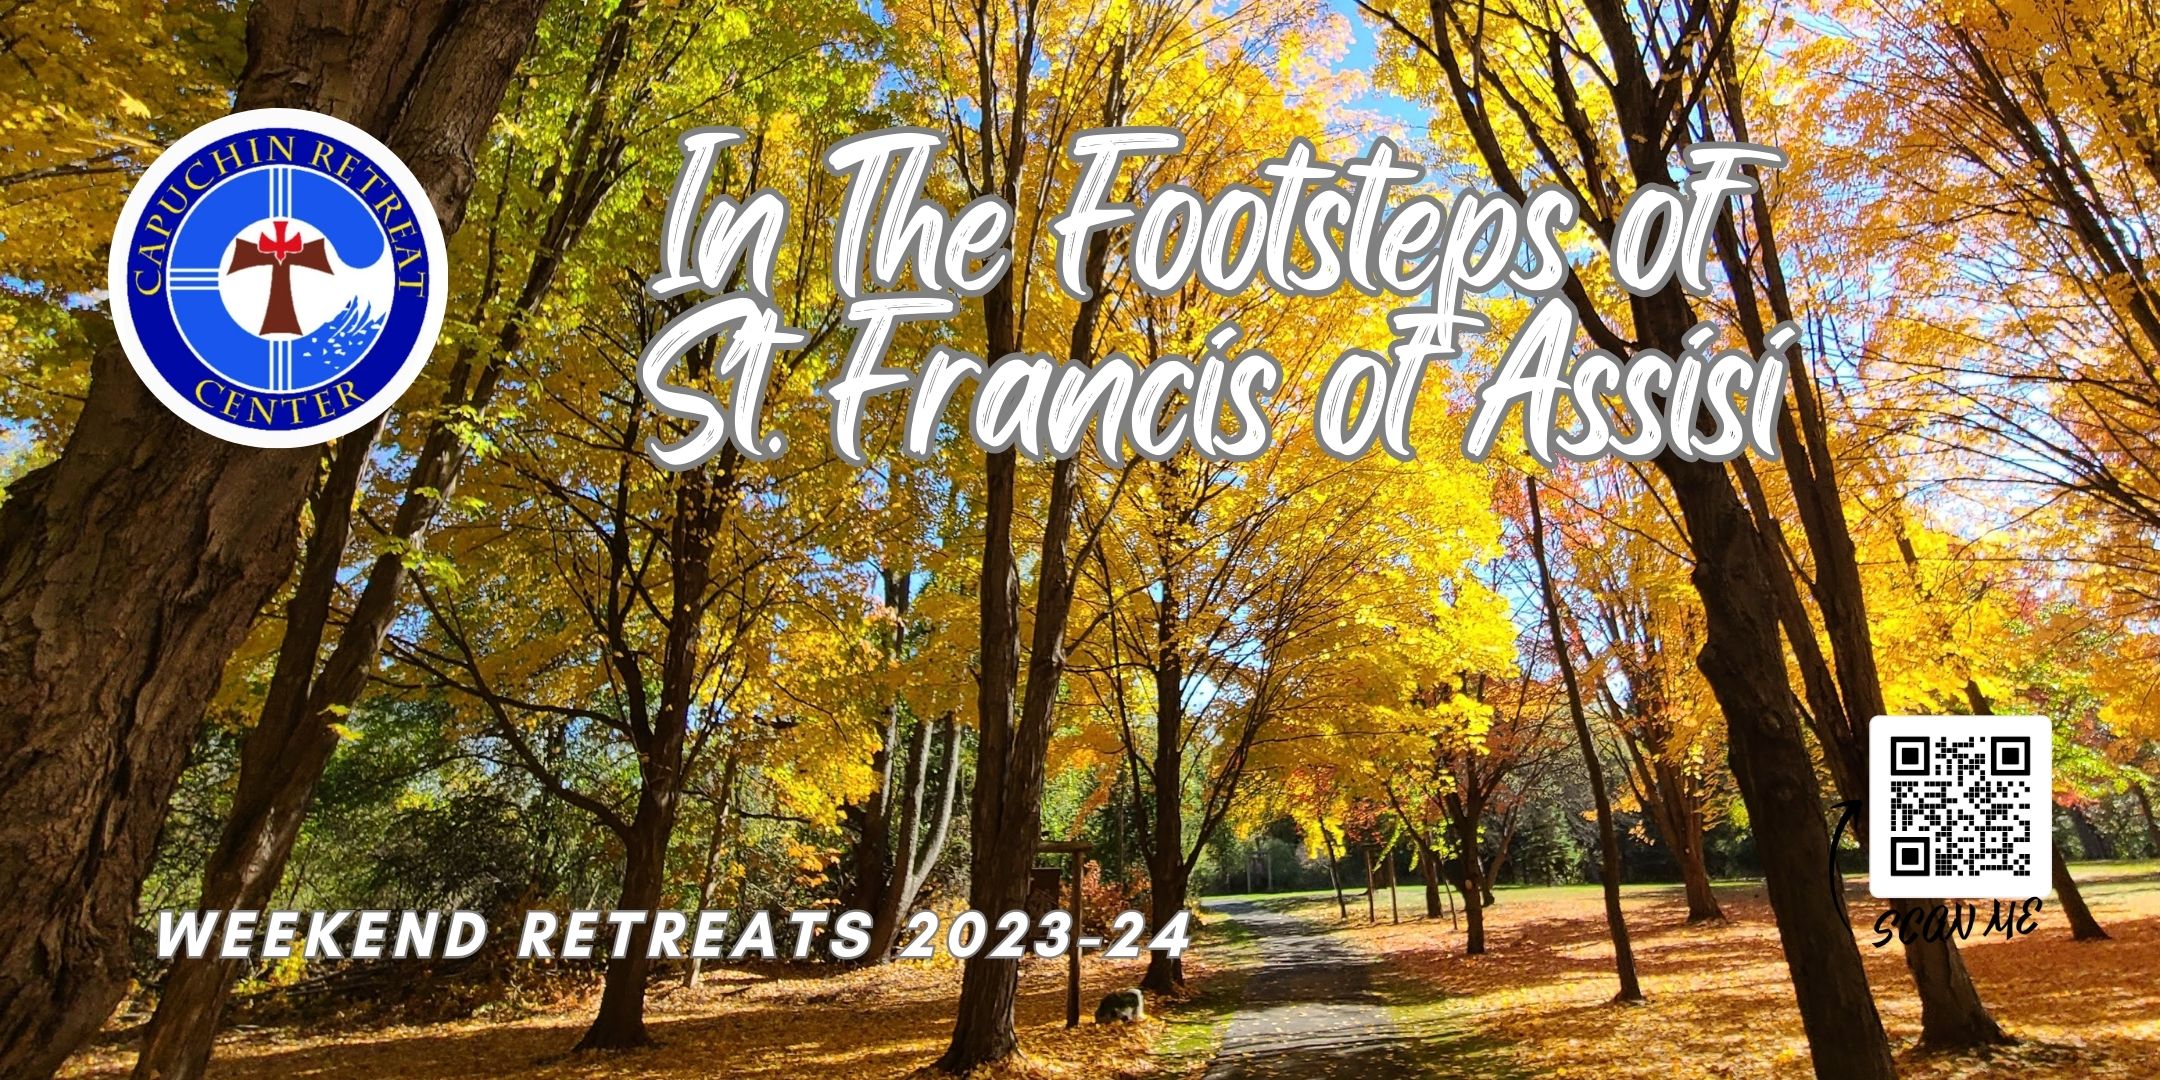 Men’s Weekend Retreat “In His Footsteps of St. Francis of Assisi”